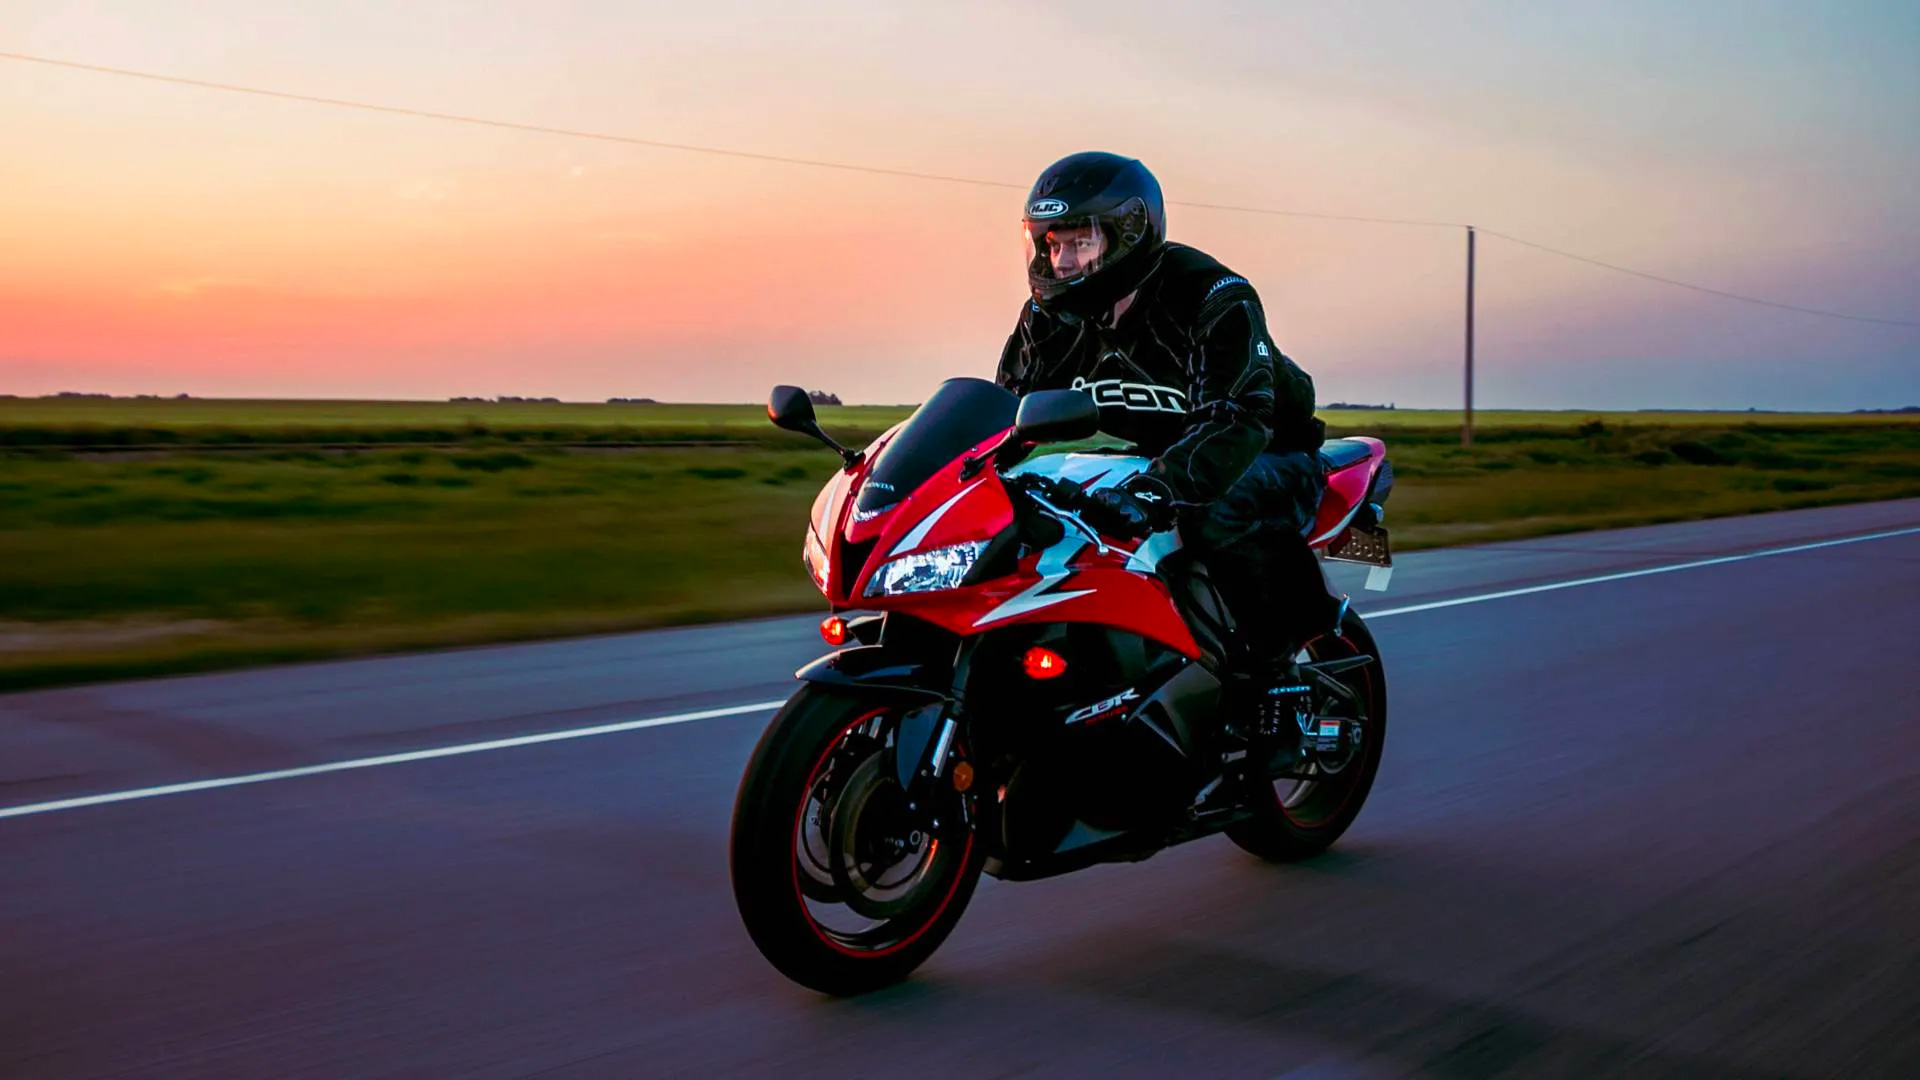 motorcycle rider on a Honda sportsbike riding at sunset in the countryside